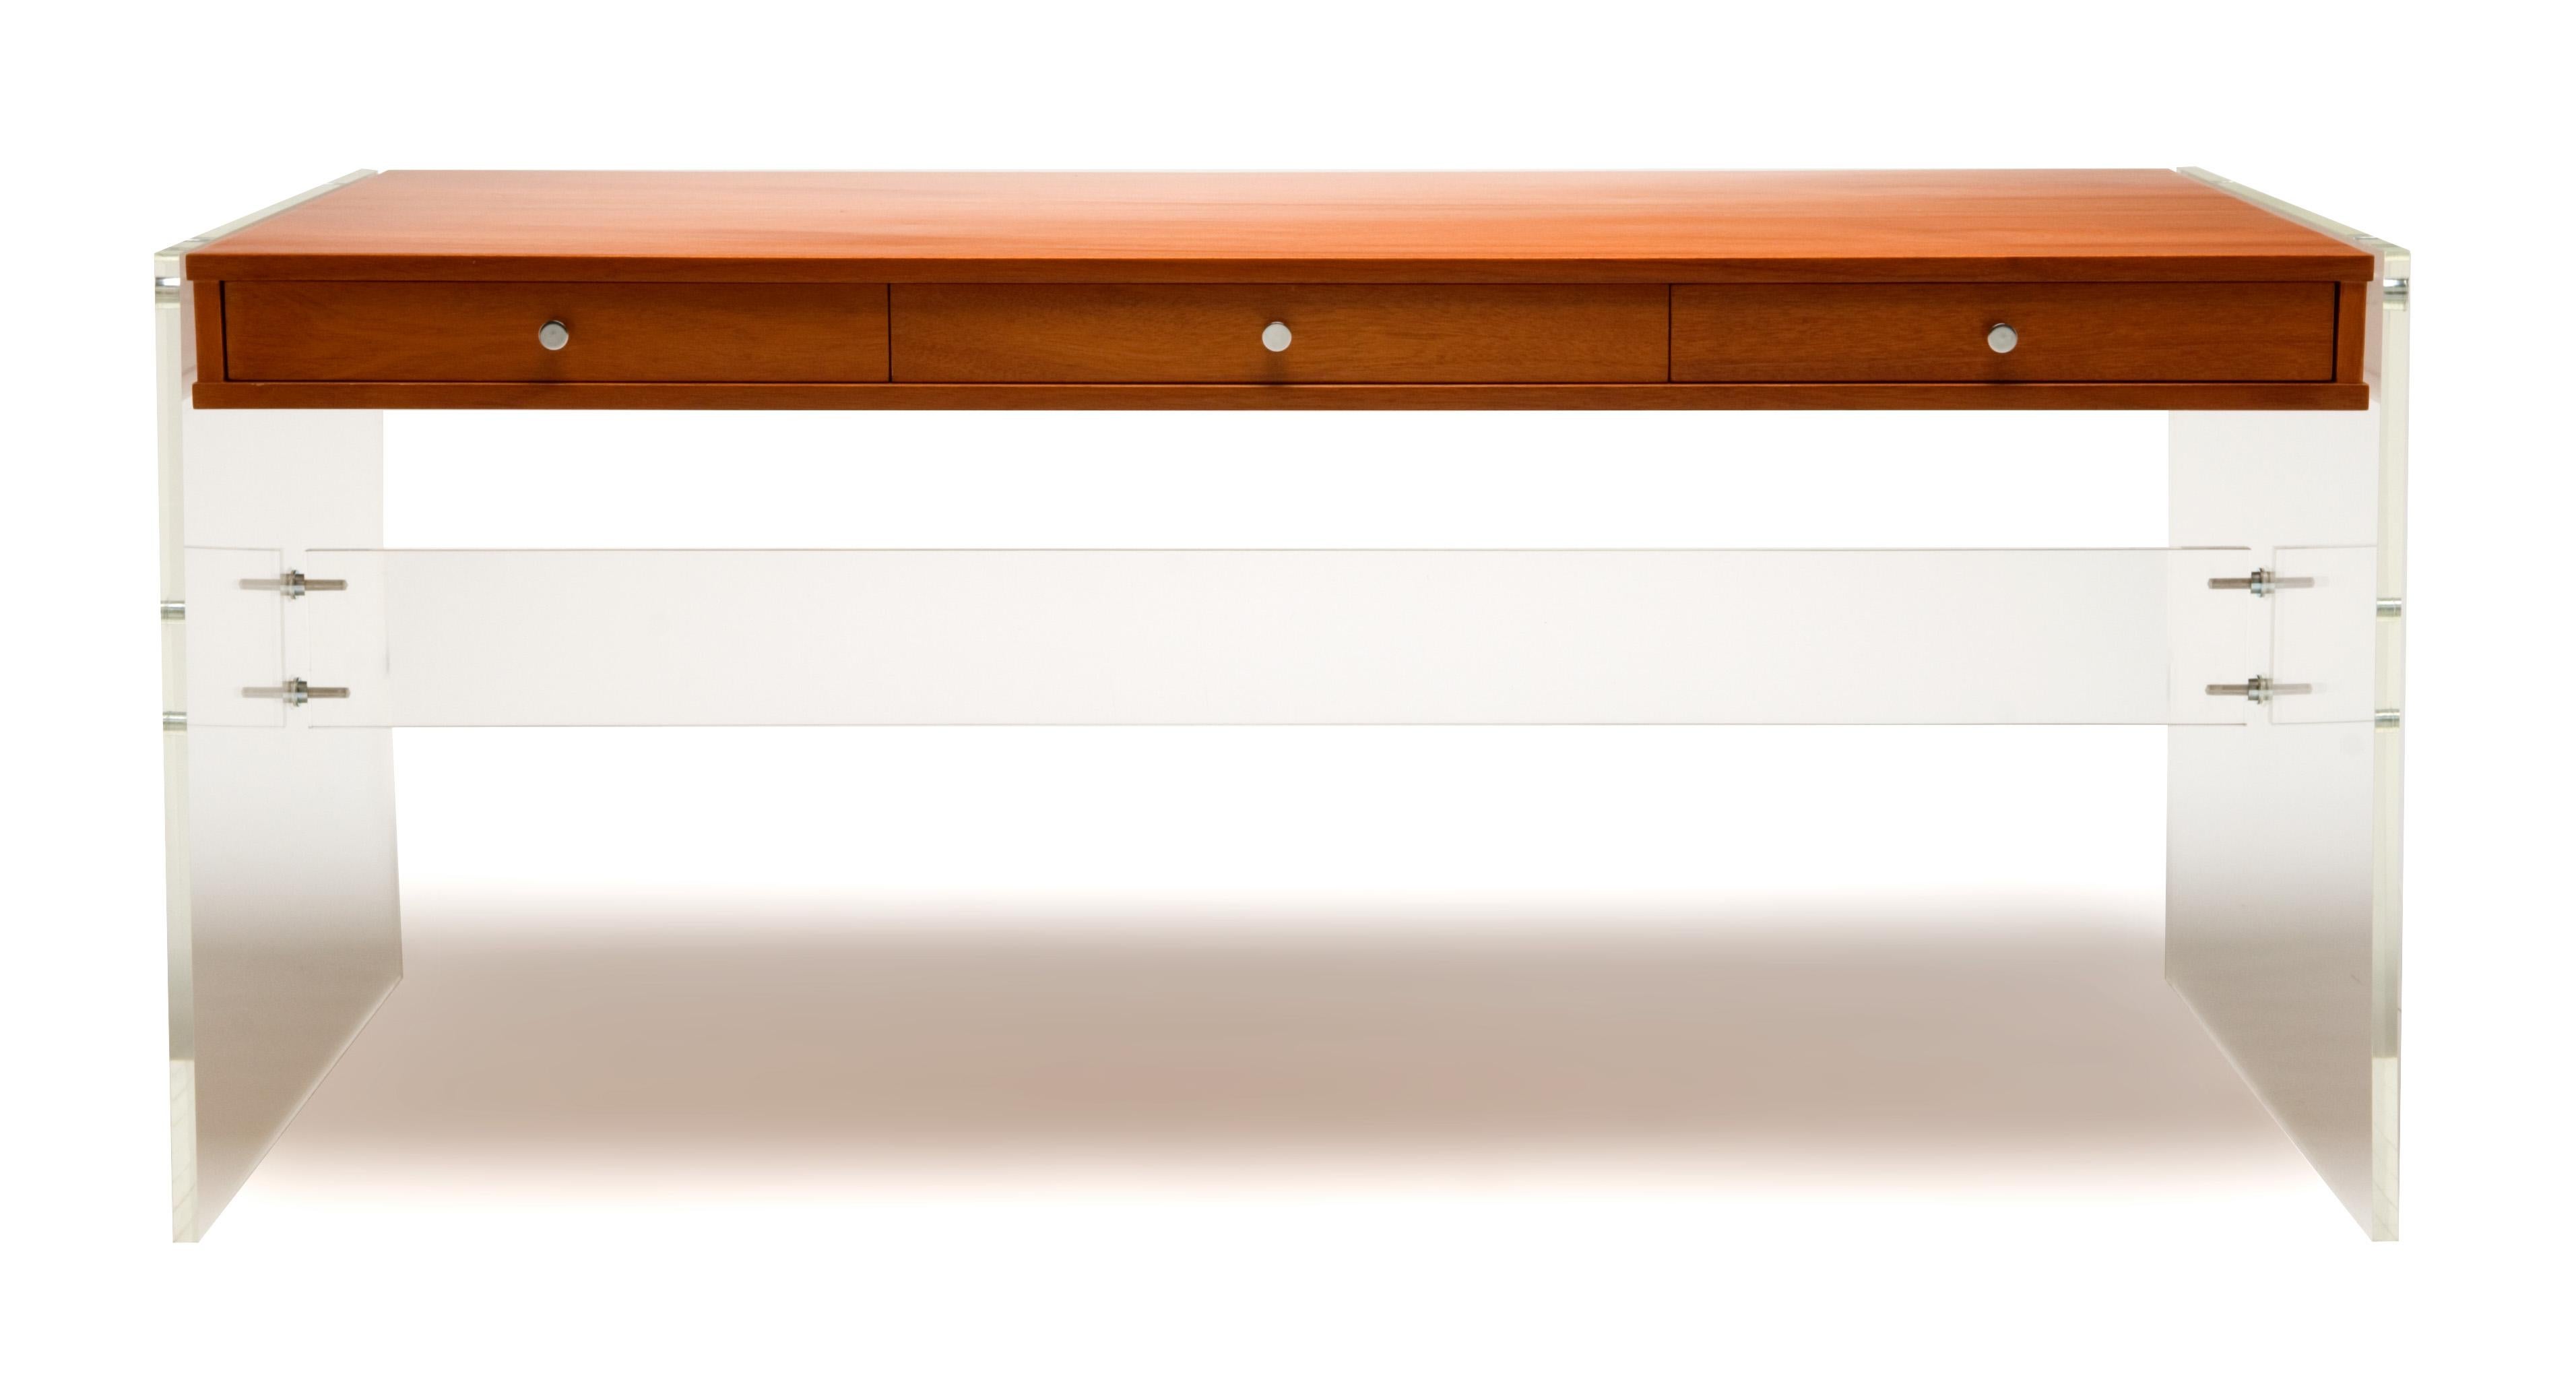 A highly engineered modernist desk made from a walnut (or oak, mahogany, or rosewood veneer) case “floating” on a Lucite base, which is affixed by custom-designed hardware. Custom sizes and finishes available.